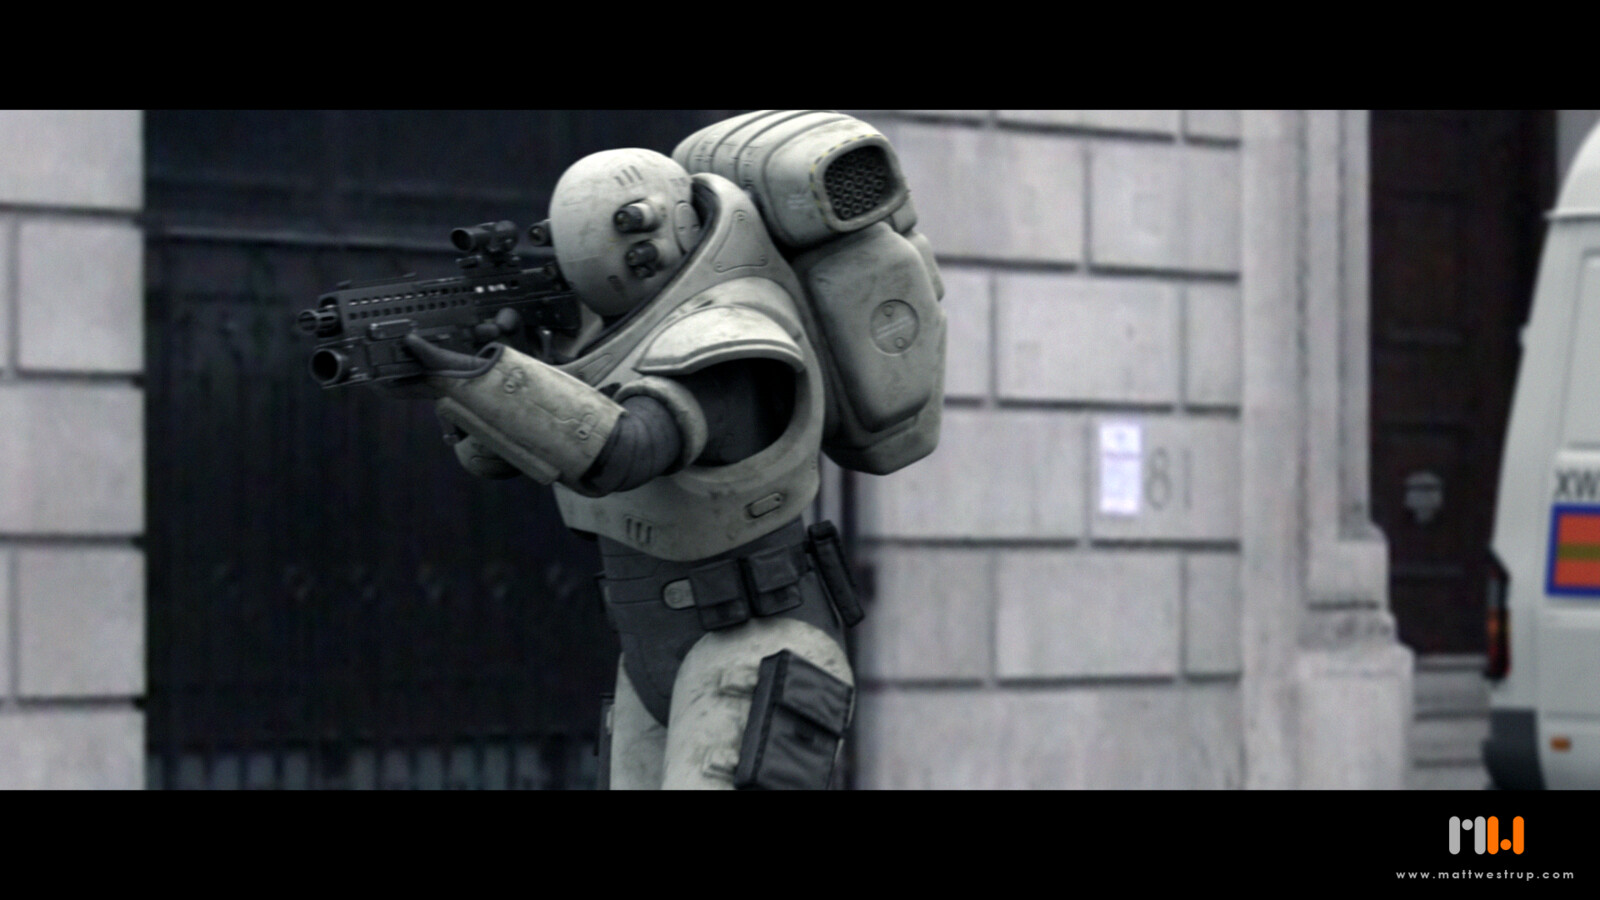 A.S.W.A.T Soldier - Role: All VFX.